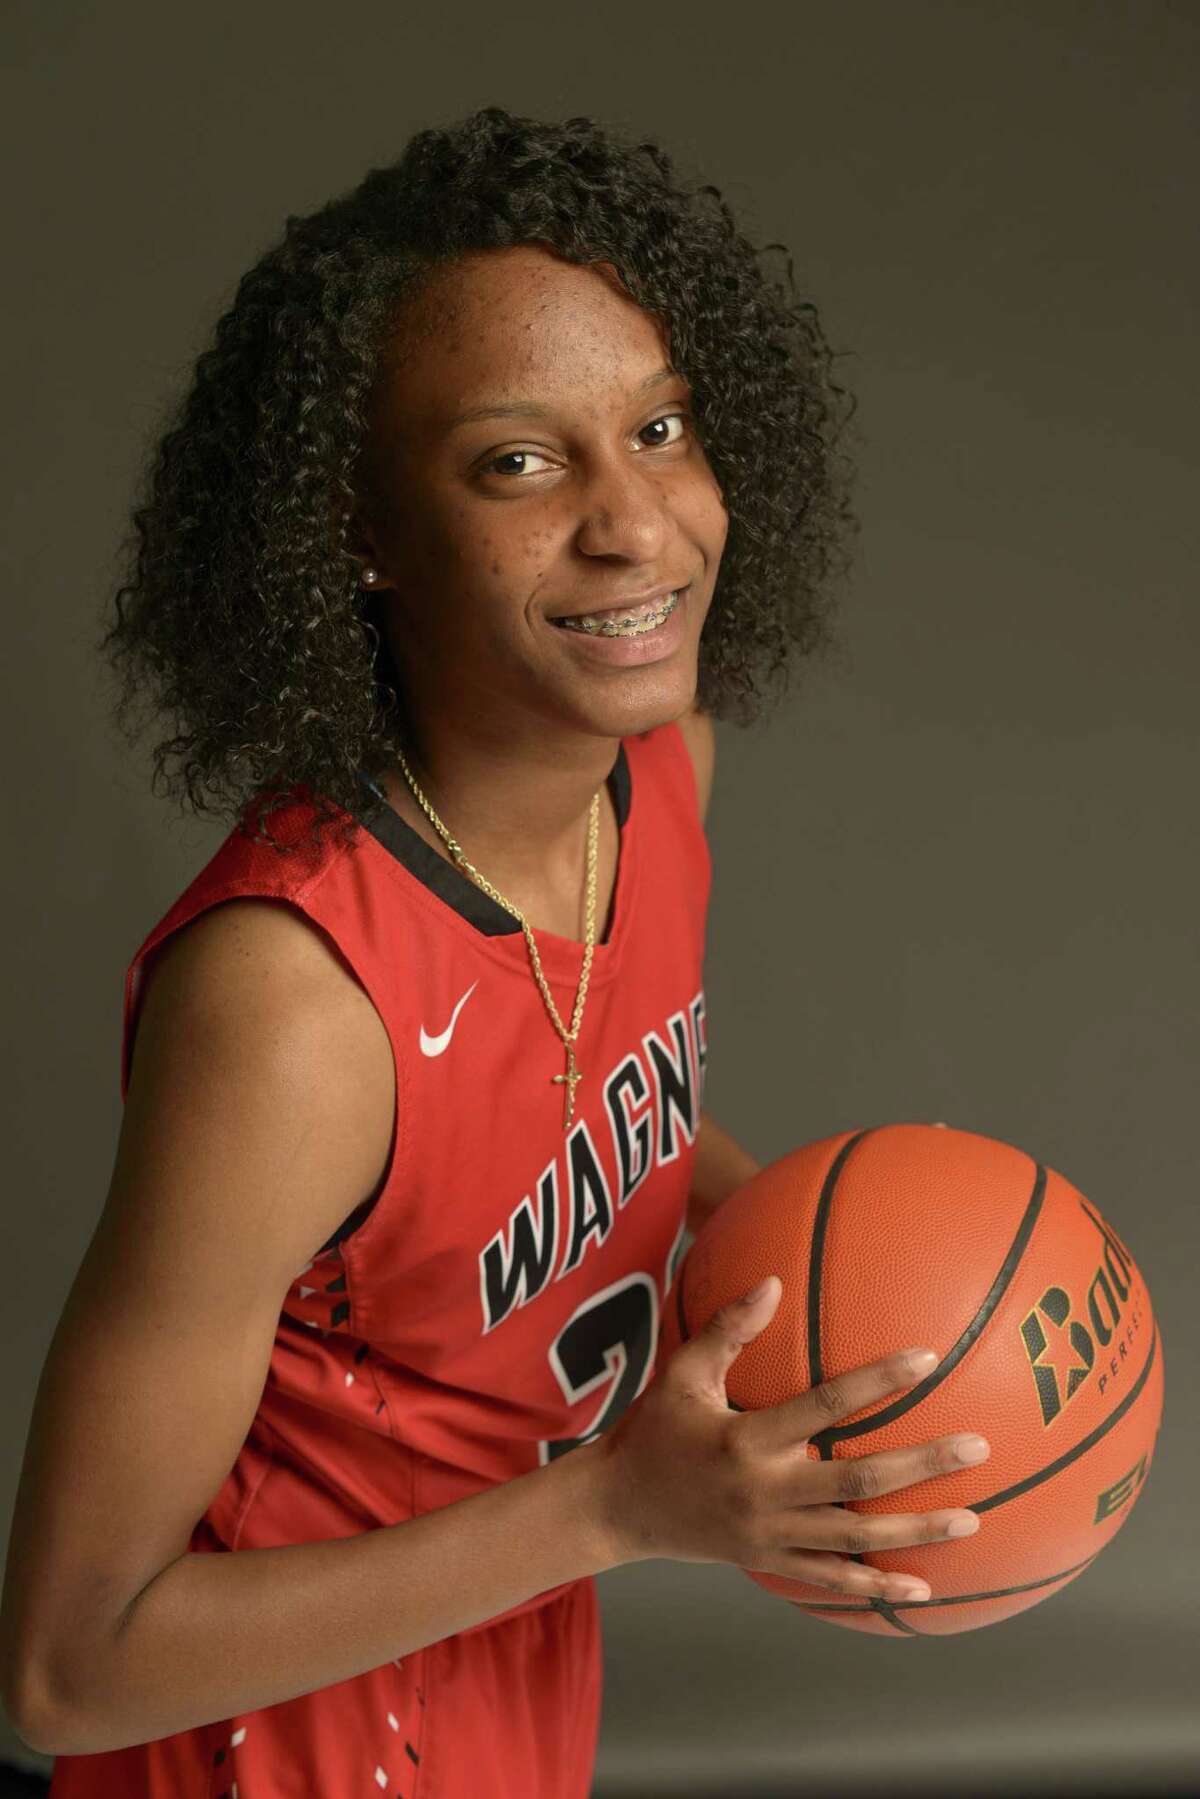 Kiana Williams, Stanford Senior, guard, 5-8 Kiana Williams shared Express-News Player of the Year honors with Georgia’s Gabby Connally in 2017. Williams played four seasons at Wagner and is a former high school teammate of Arkansas’ Amber Ramirez. Both led the Thunderbirds to UIL state tournament appearances in 2014 and 2015. Williams was selected as a McDonald’s All-American in 2017. Williams became Stanford’s full-time starting point guard when she was a freshman. She’s averaging 13.4 points and has made 294 3-pointers (one shy of the Stanford record) in 131 games (122 starts). On Wednesday, she was selected to the Associated Press All-America third team and was named the Pac-12 Tournament’s Most Outstanding Player. First game: Stanford vs. Utah Valley, 9 p.m. Sunday, Alamodome